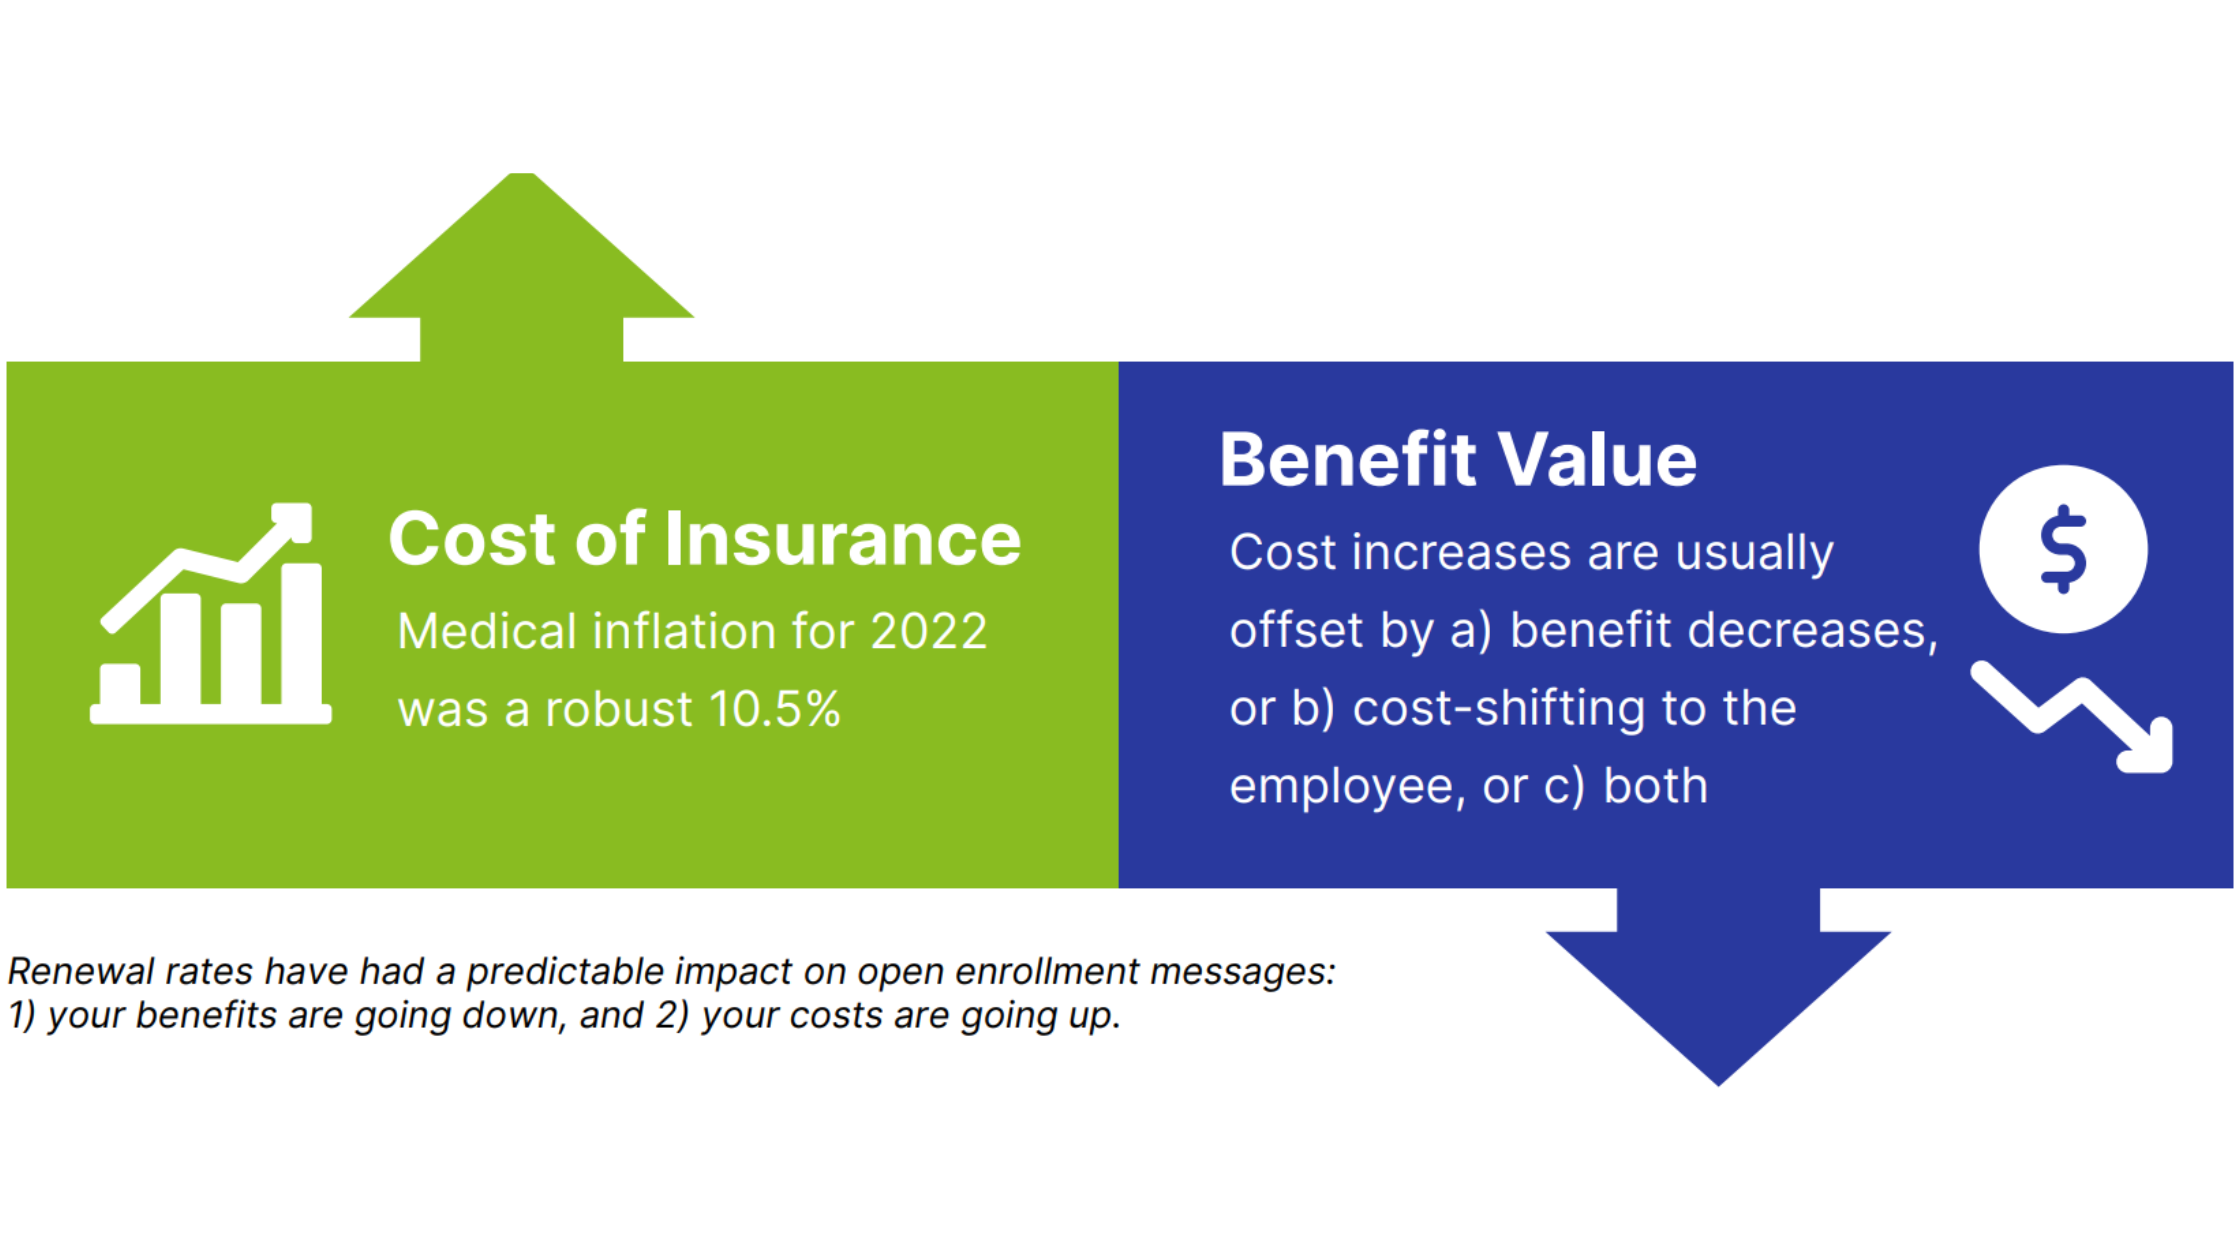 cost of insurance versus benefit value of renewal rates